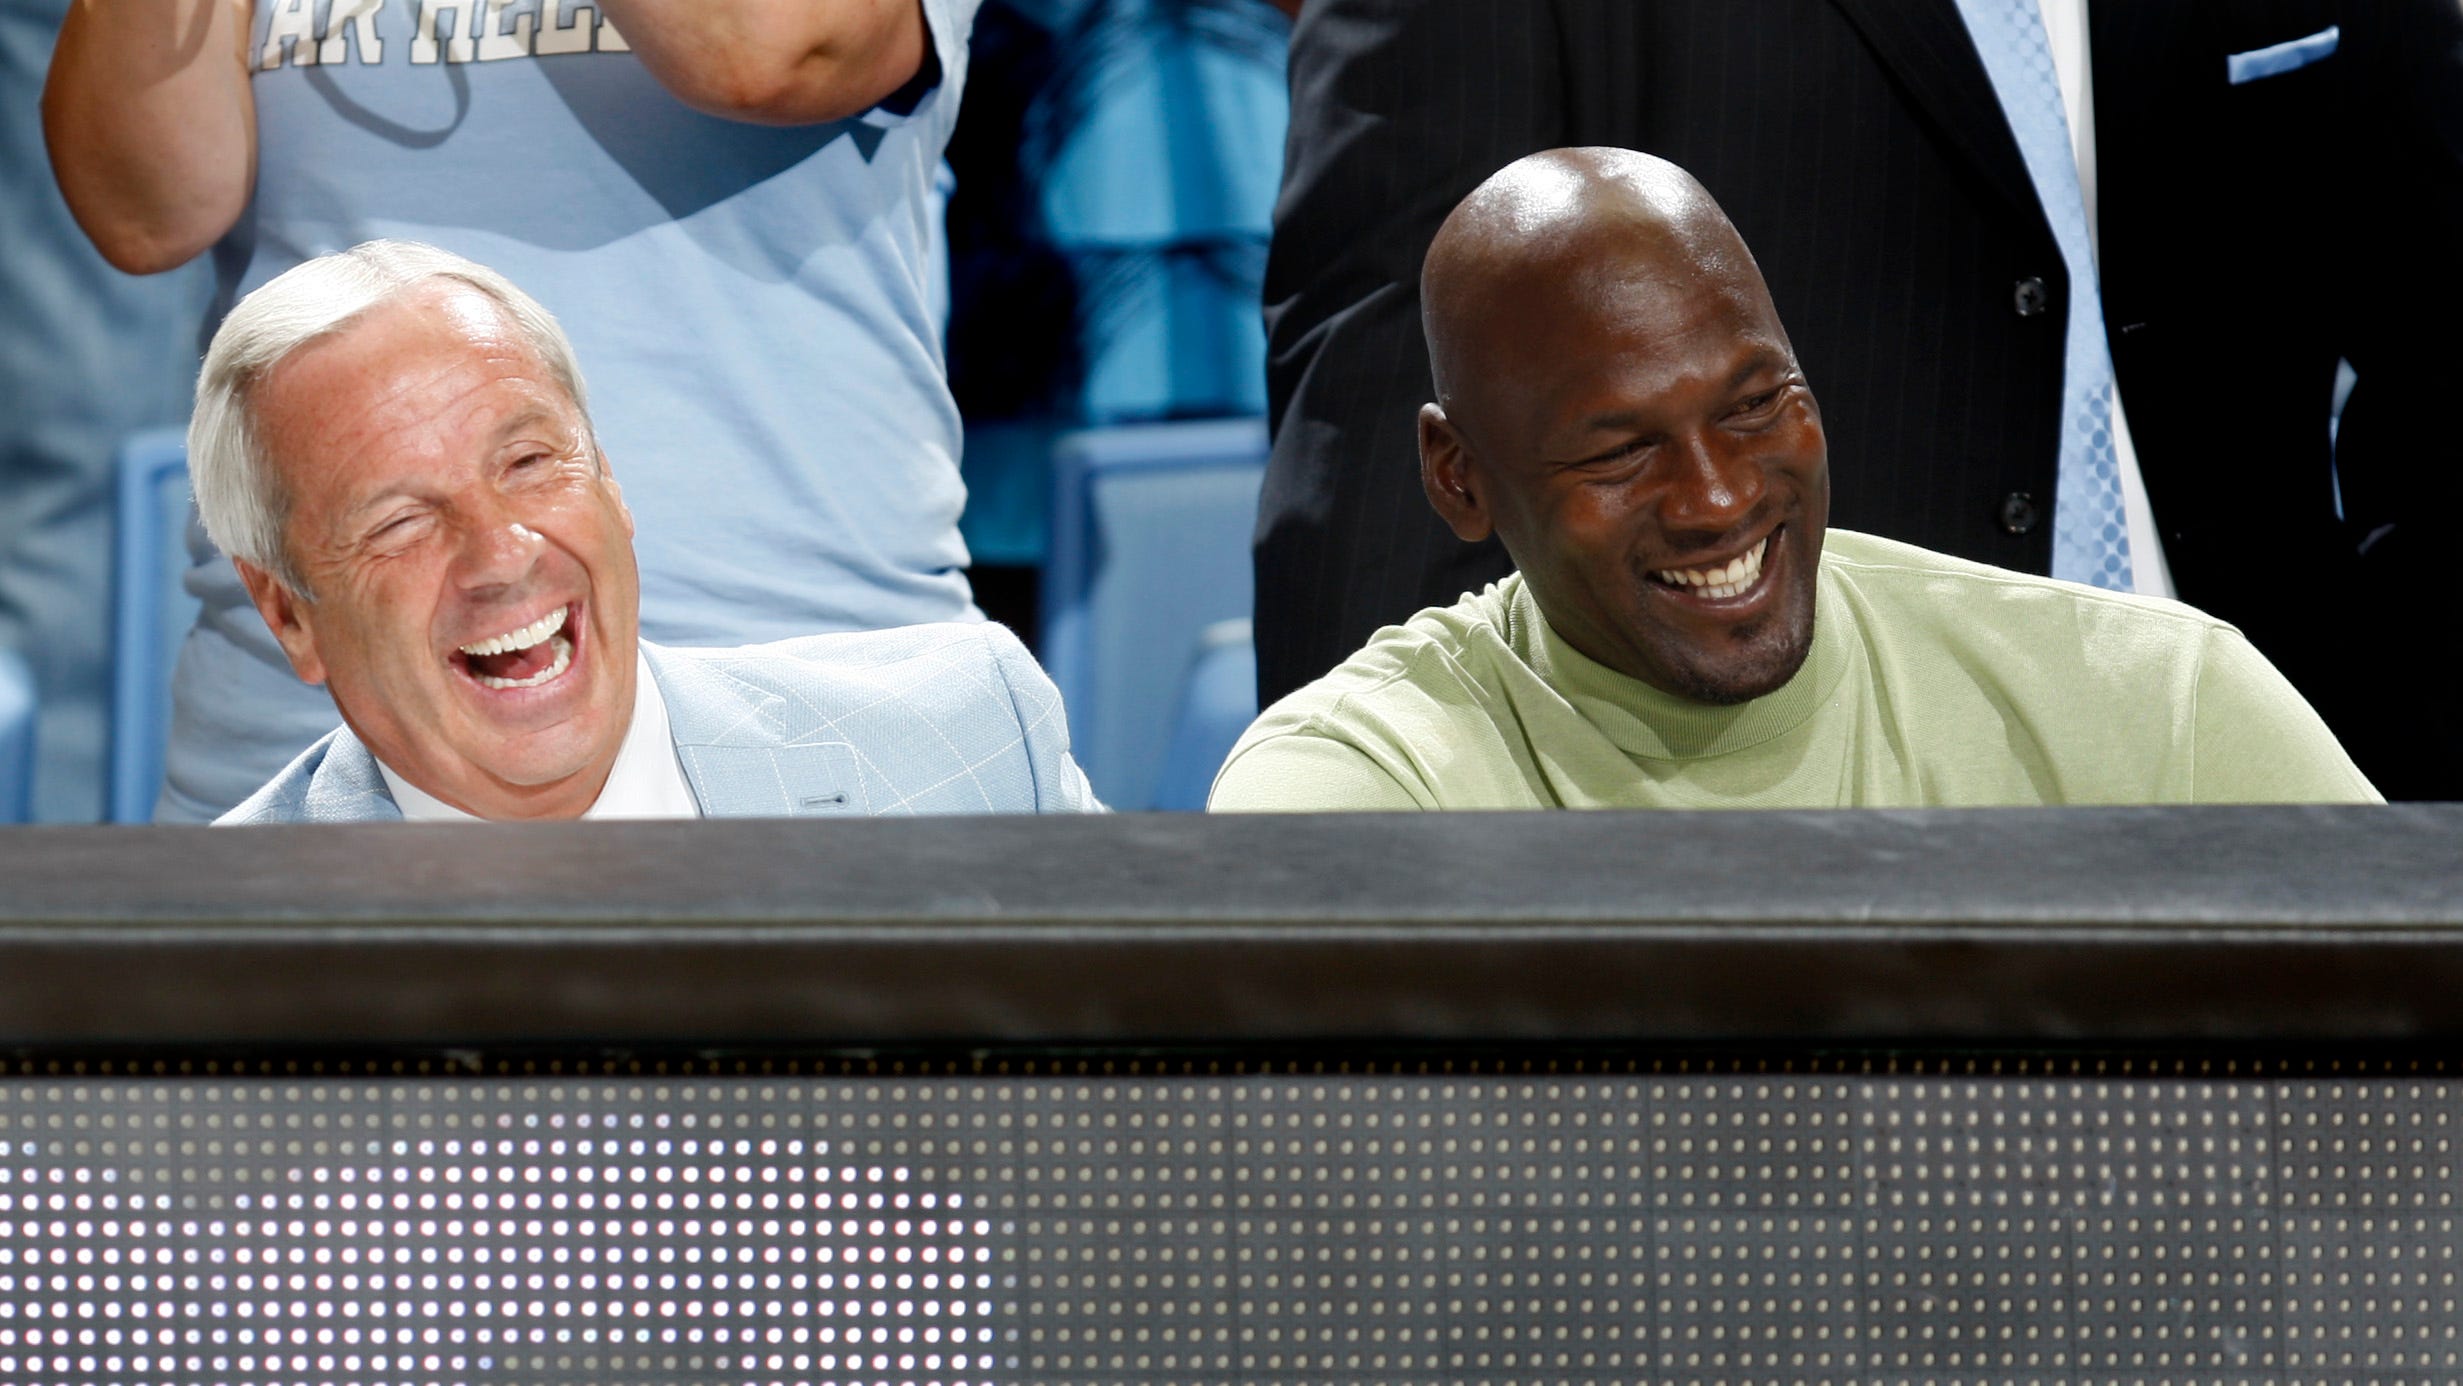 Michael Jordan reacts to Roy Williams retirement: 'He meant so much to basketball'